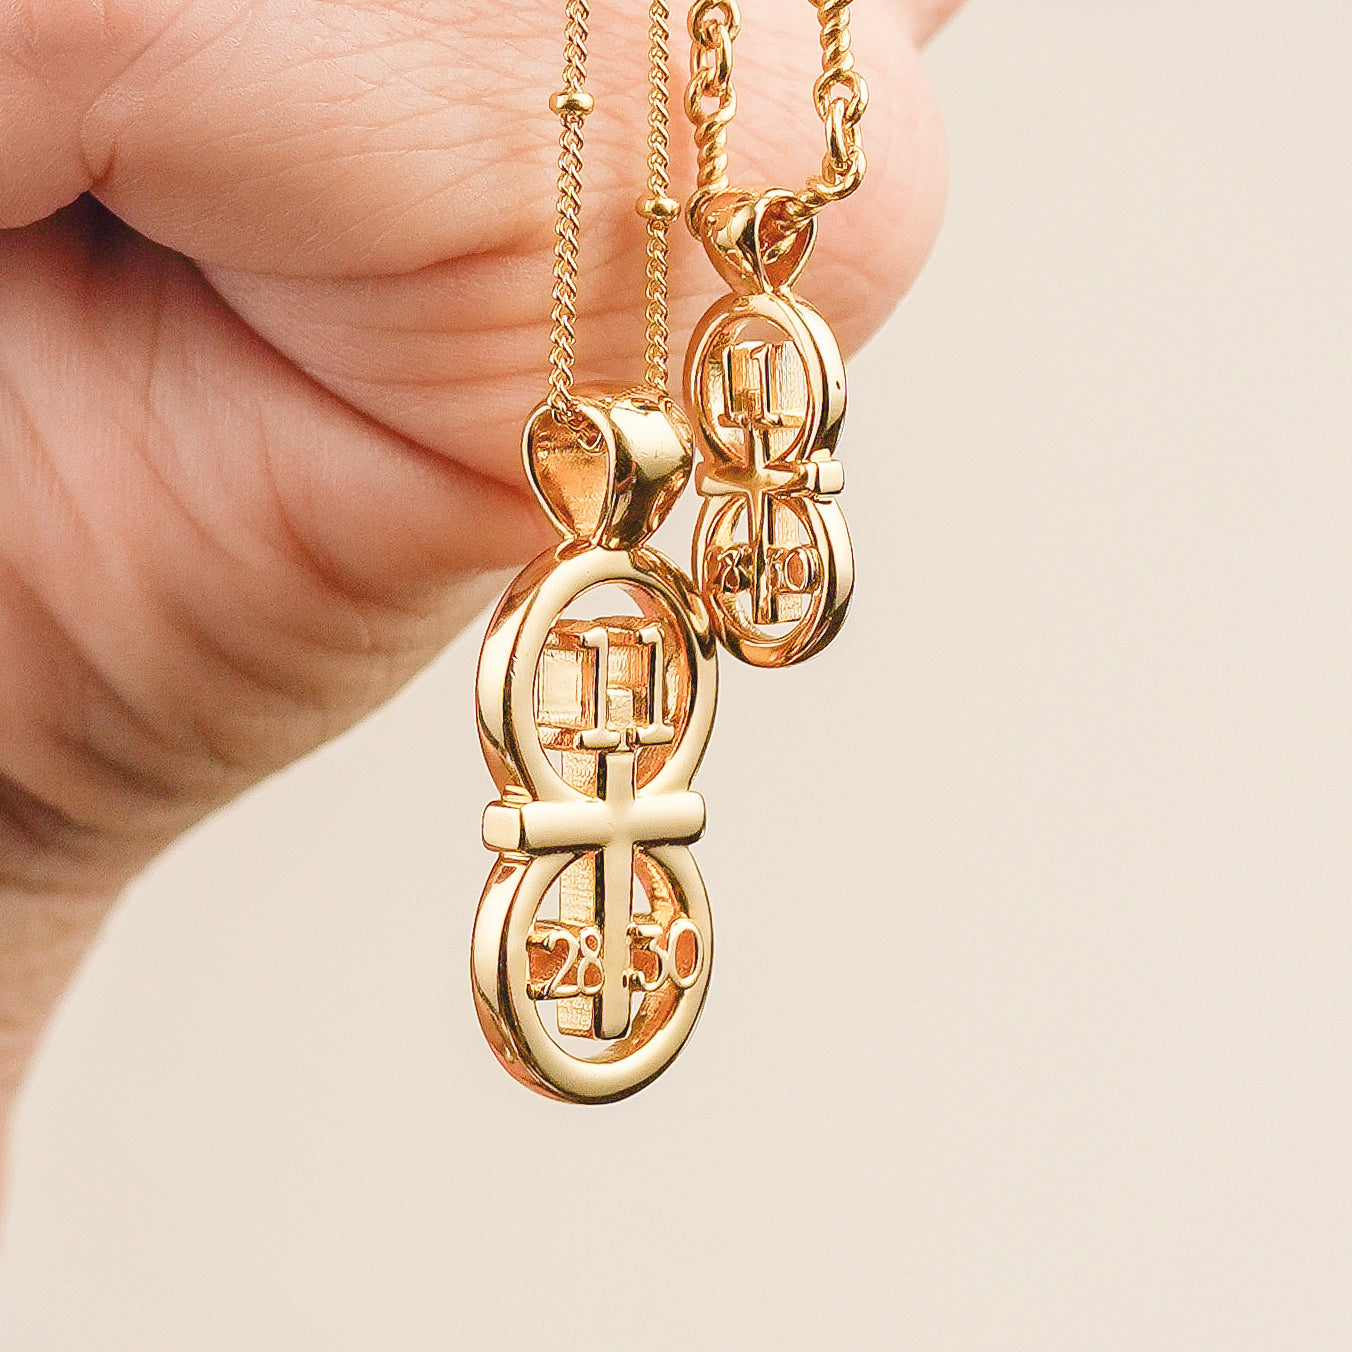 This picture displays our large pendant on our 14k gold filled satellite chain and small pendant on our 14k golf filled Rolo chain. The pendant is draped over a hand for size comparison. The RIYAN 29 and 11® pendant has the numbers 11, 28, and 30 intertwined with the cross to represent Matthew 11:28-30 with the chapter word "Matthew" inscribed on the back.